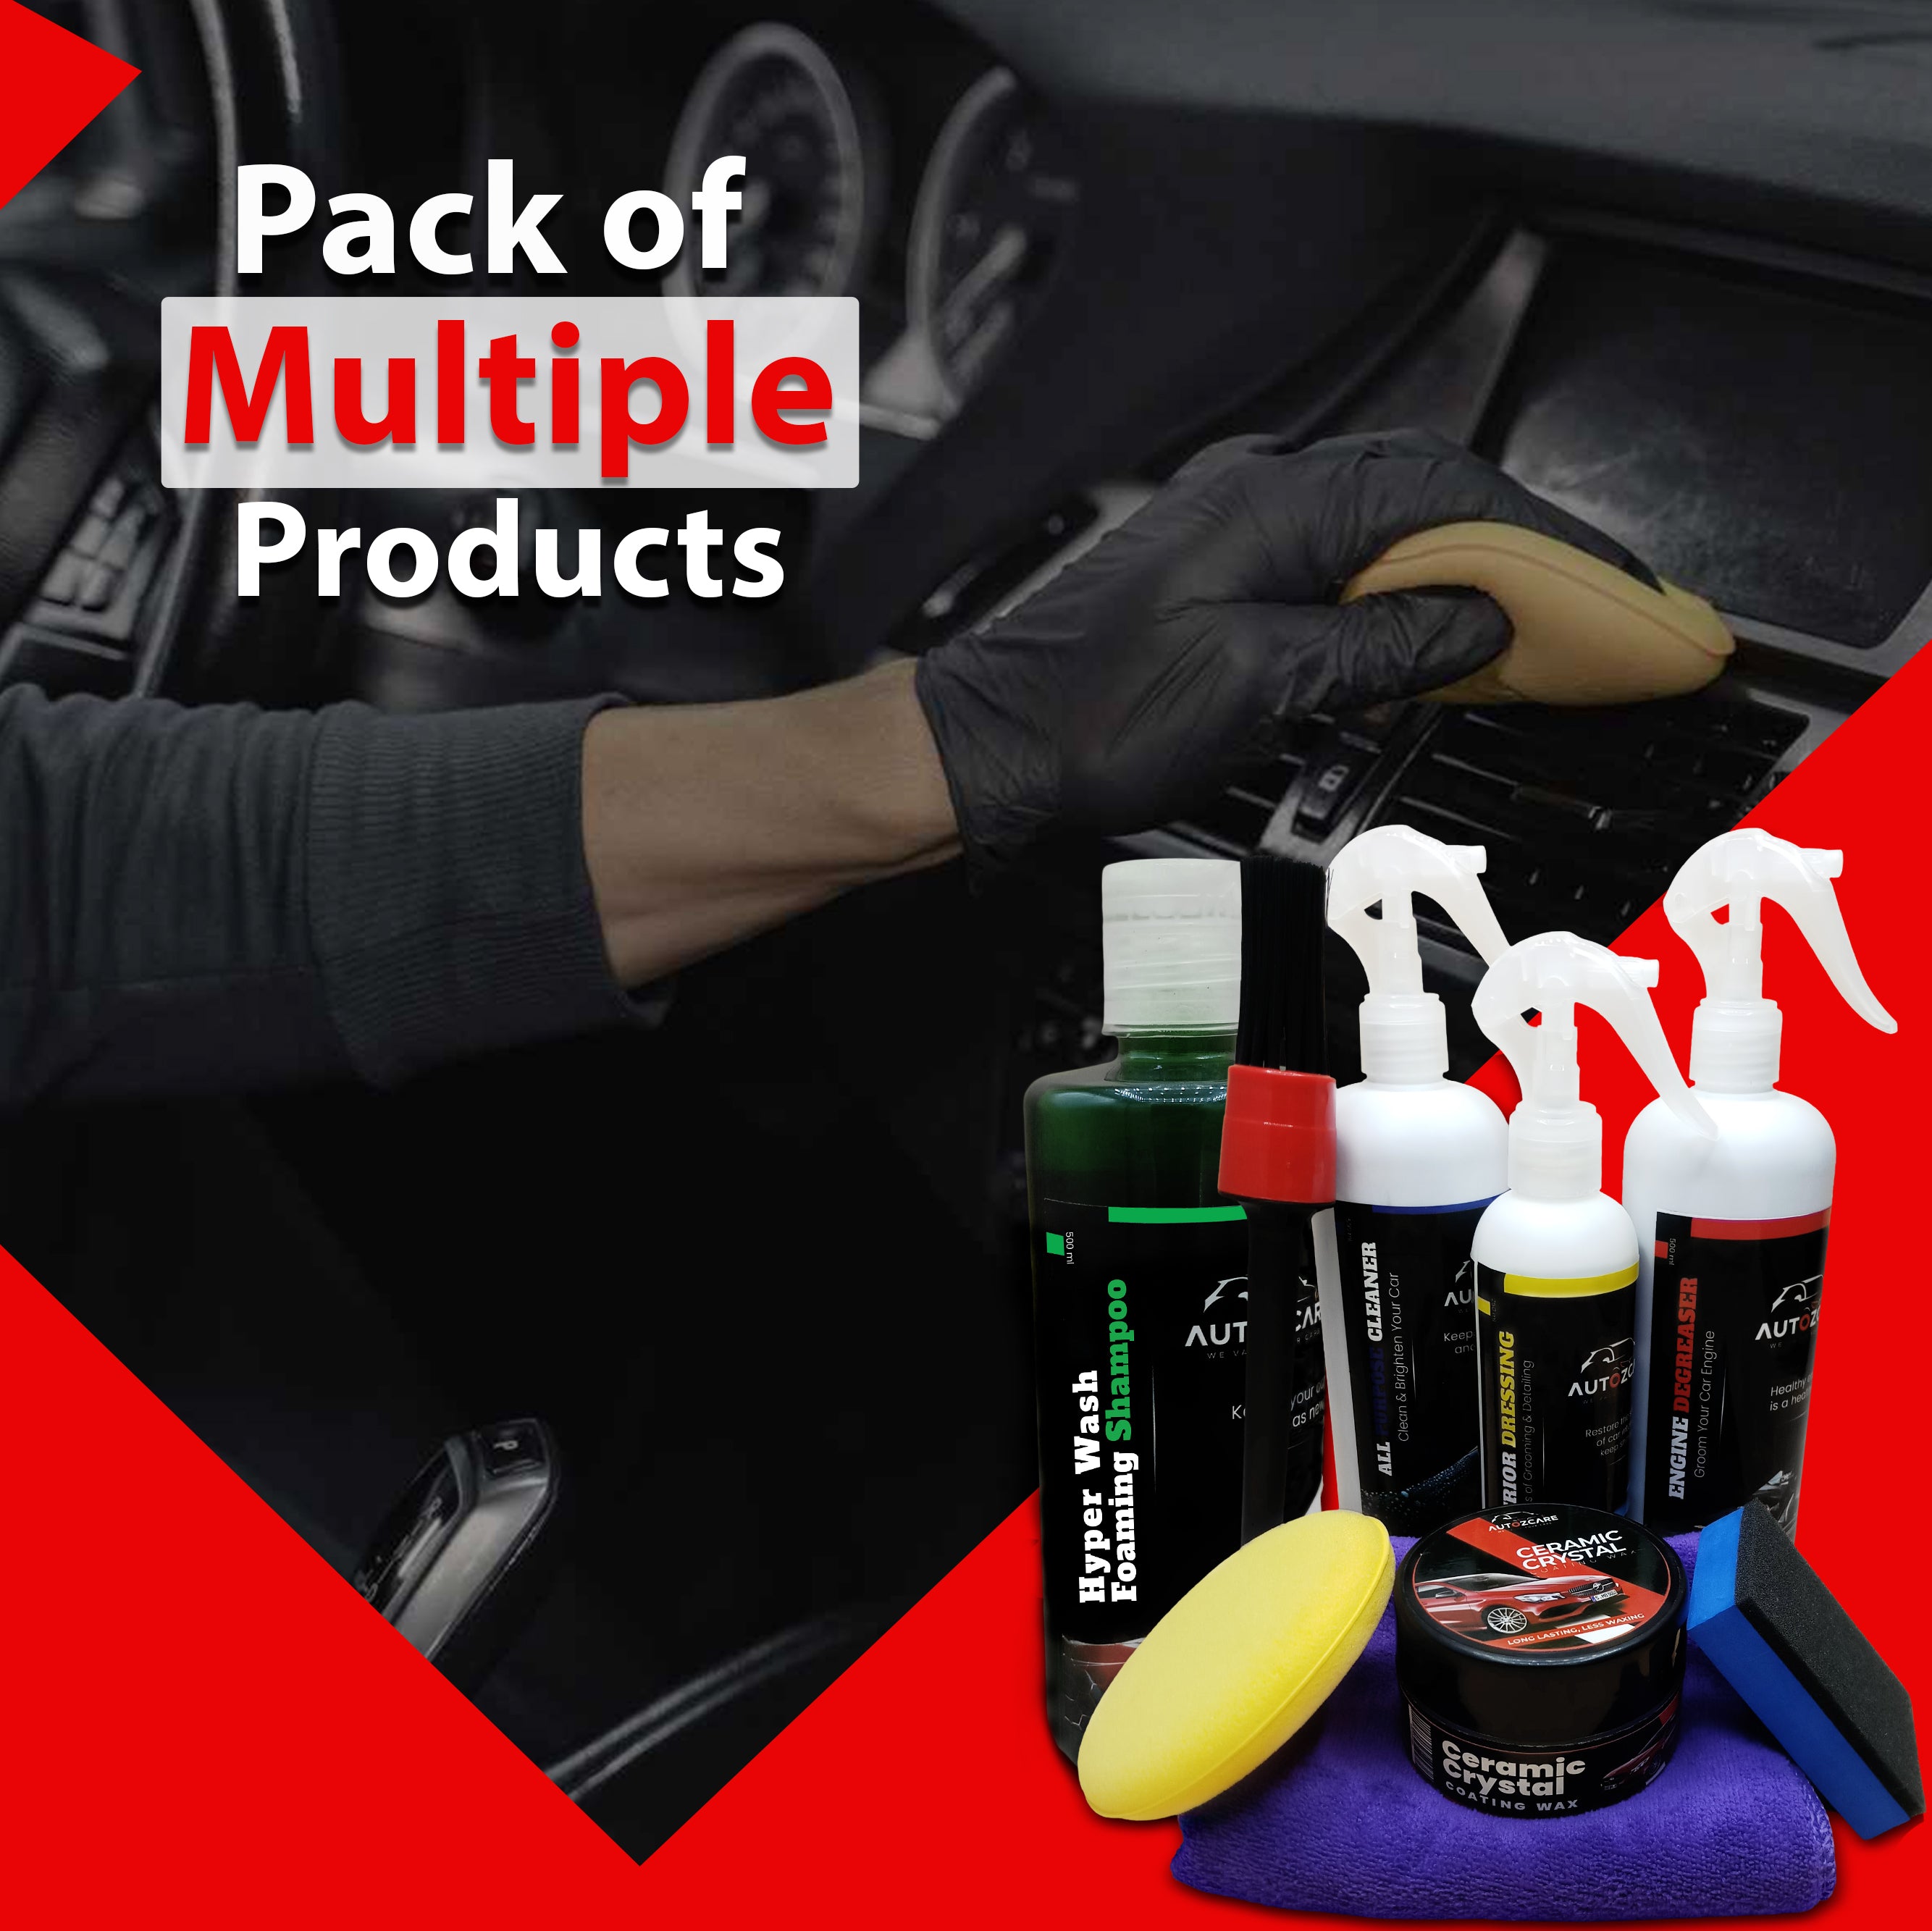 Pack of Multiple Products